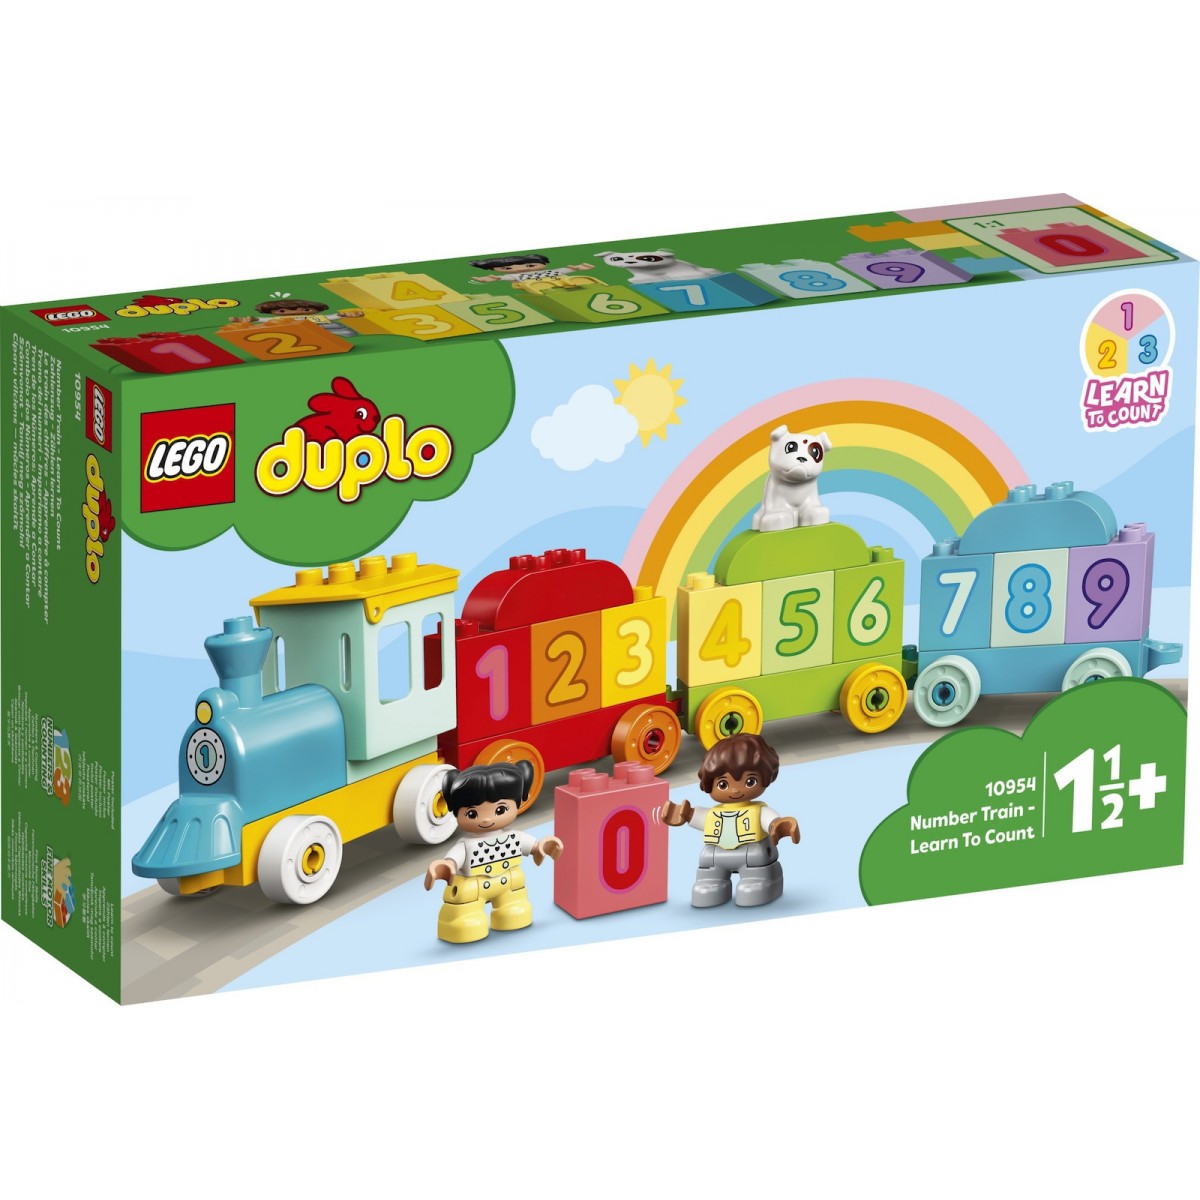 LEGO DUPLO 10954 NUMBER TRAIN LEARN TO COUNT